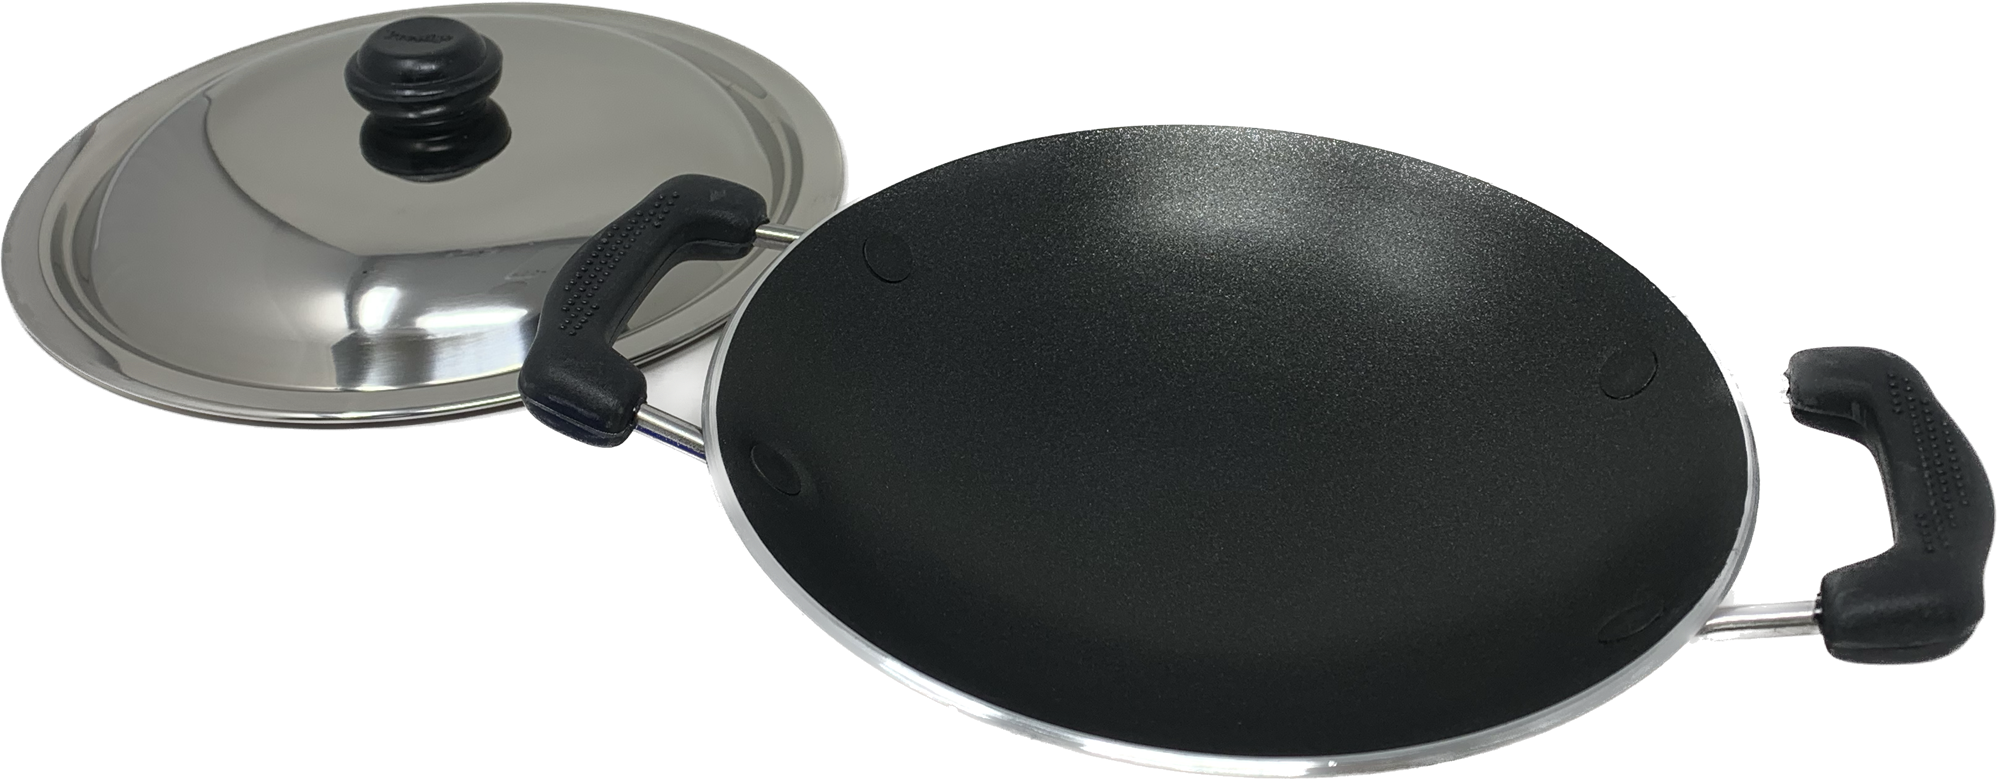 Cast Iron Appa Chatti with Lid / Appam pan For Kitchen use Pack of 1 Piece